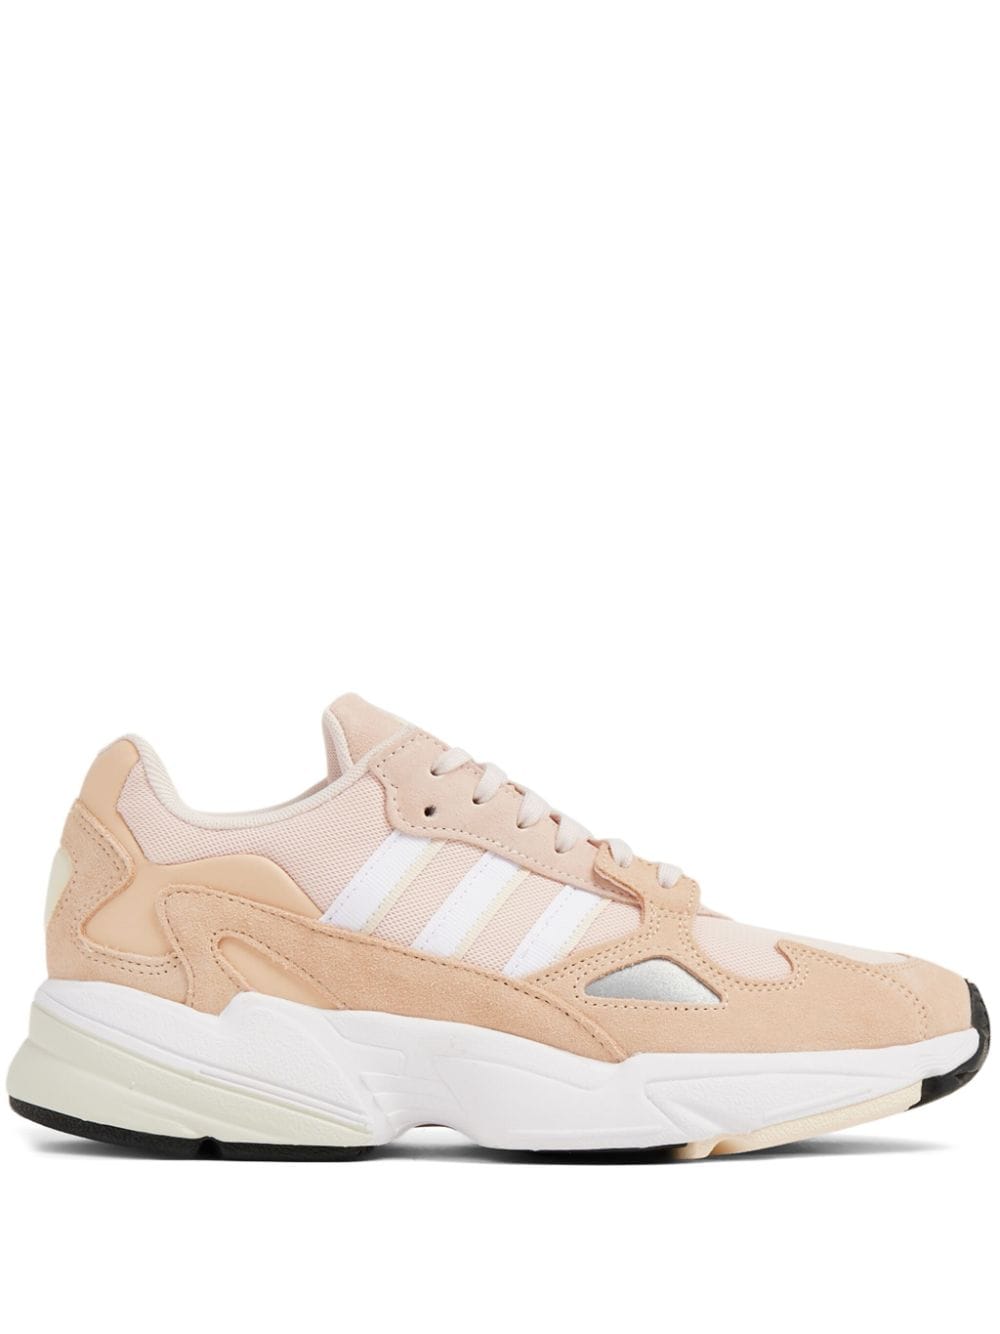 adidas Falcon lace-up sneakers - Neutrals von adidas